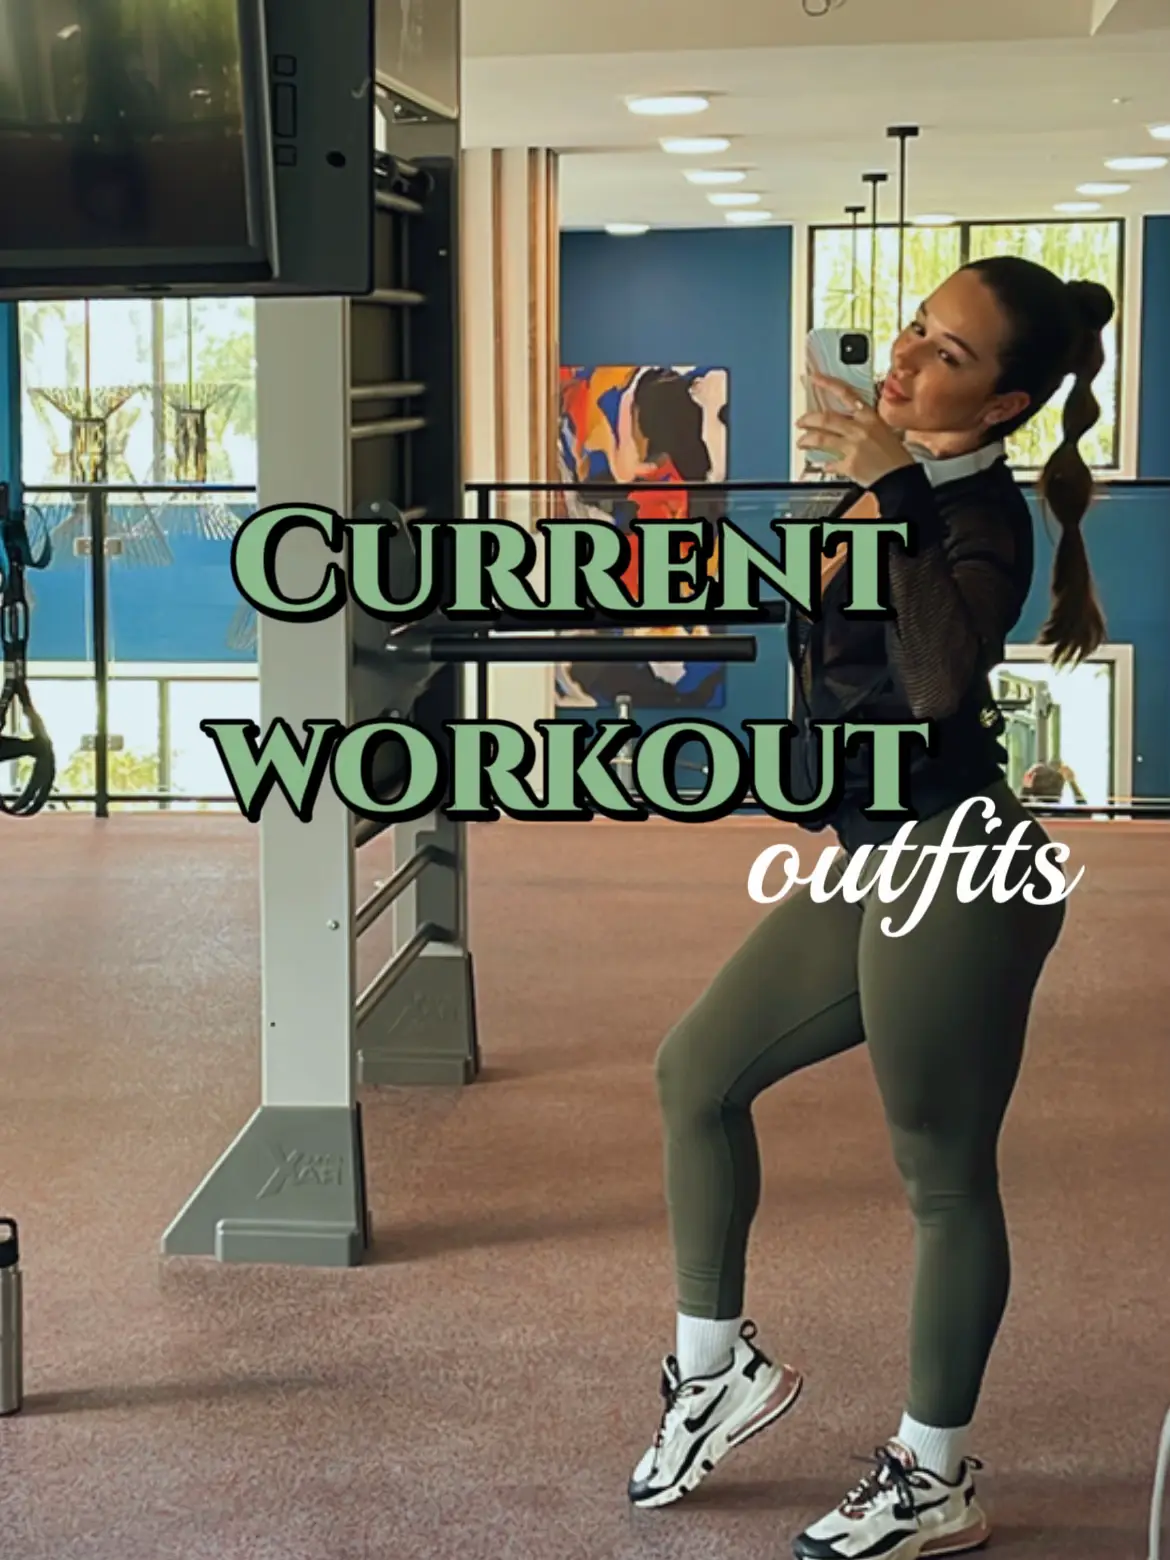 Outfit Ideas for Yoga  Womens workout outfits, Workout attire